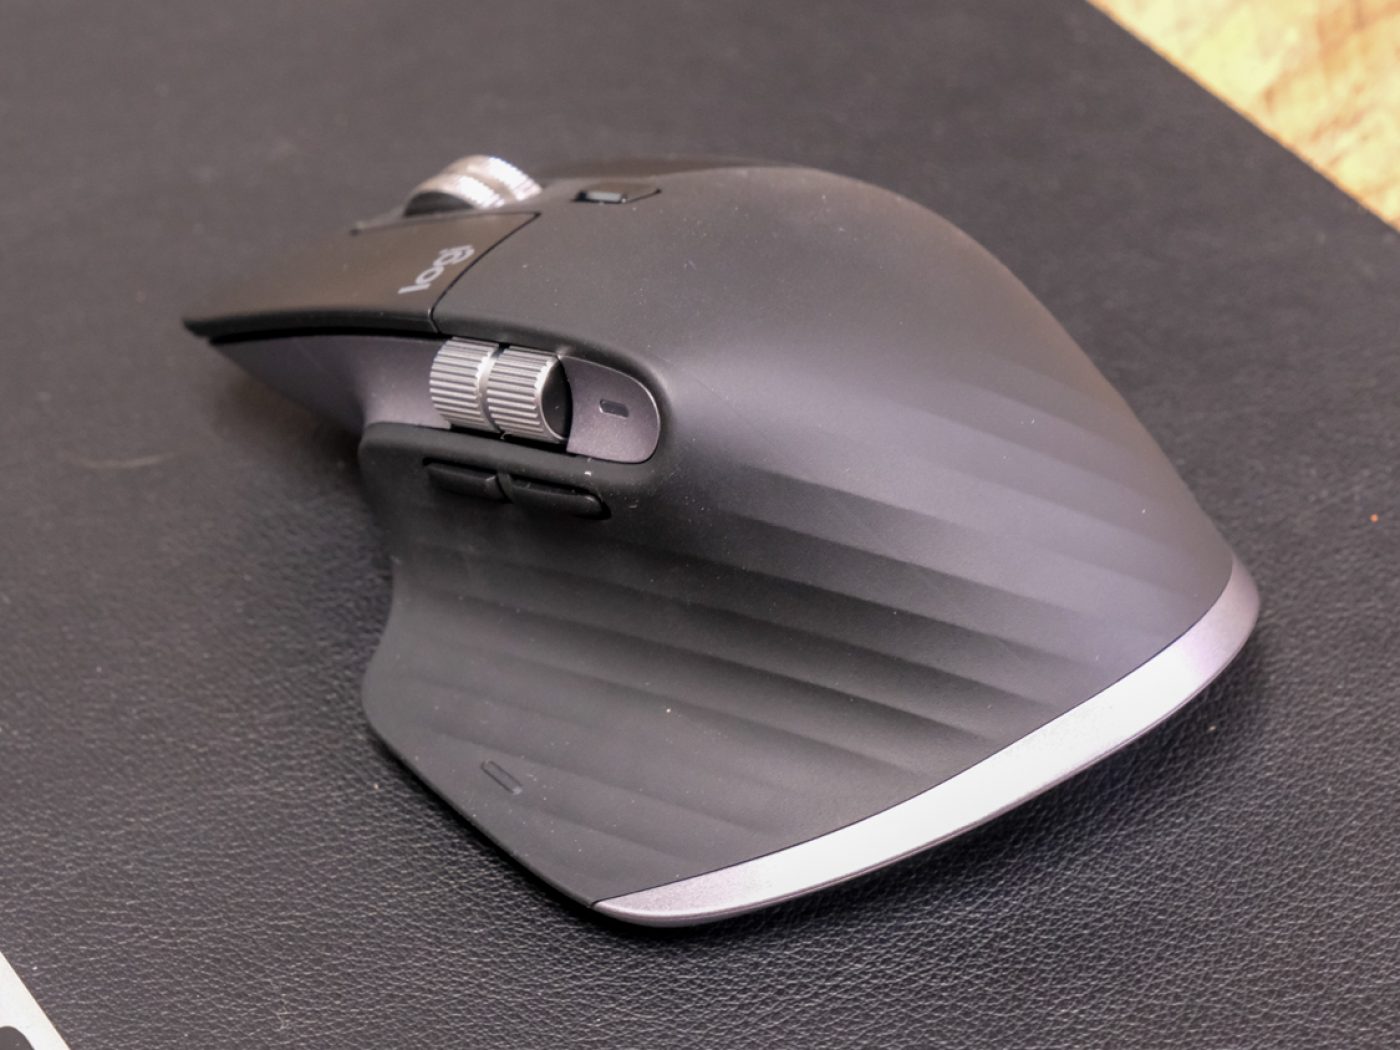 Pair your Mac with Logitech's MX Master 3S mouse while it's down